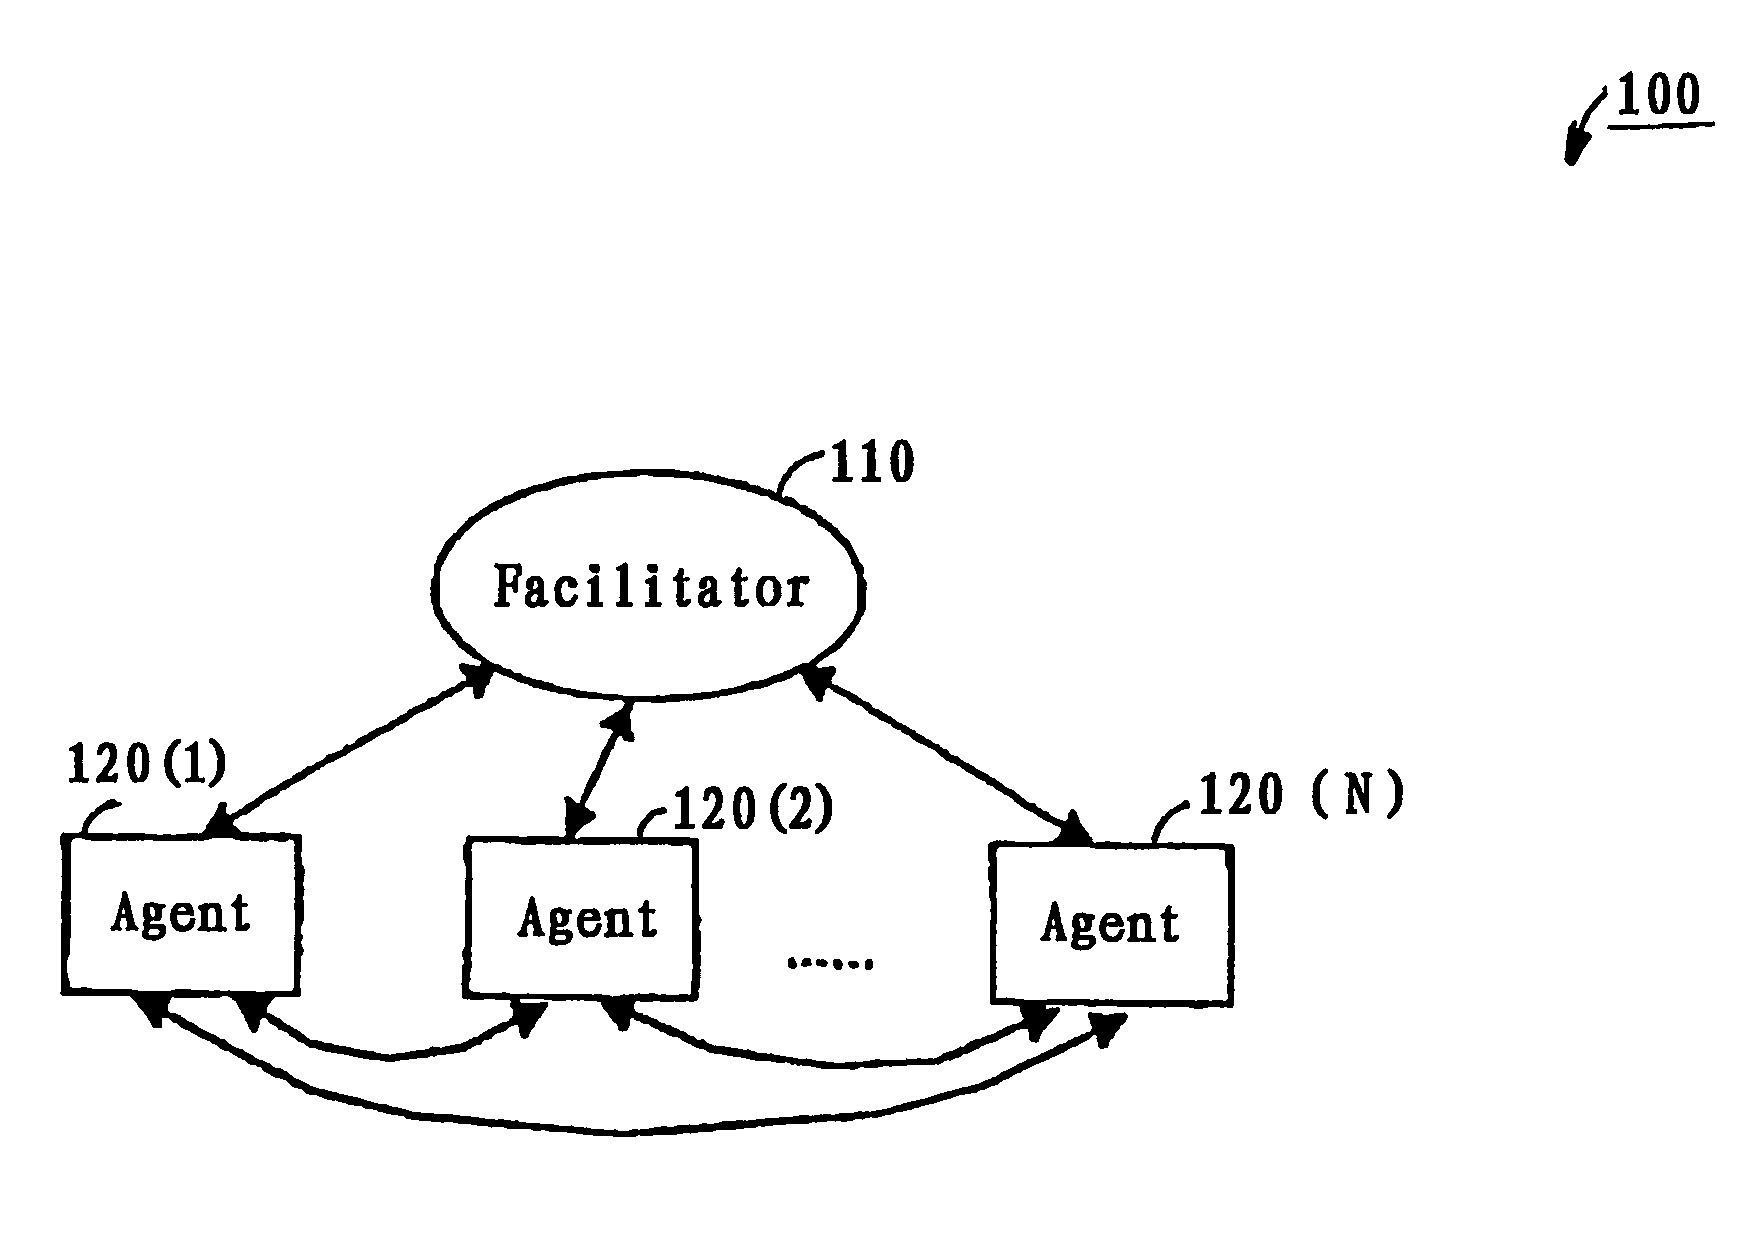 Method, apparatus, and system for distributed meeting scheduling based on autonomous multi-agent